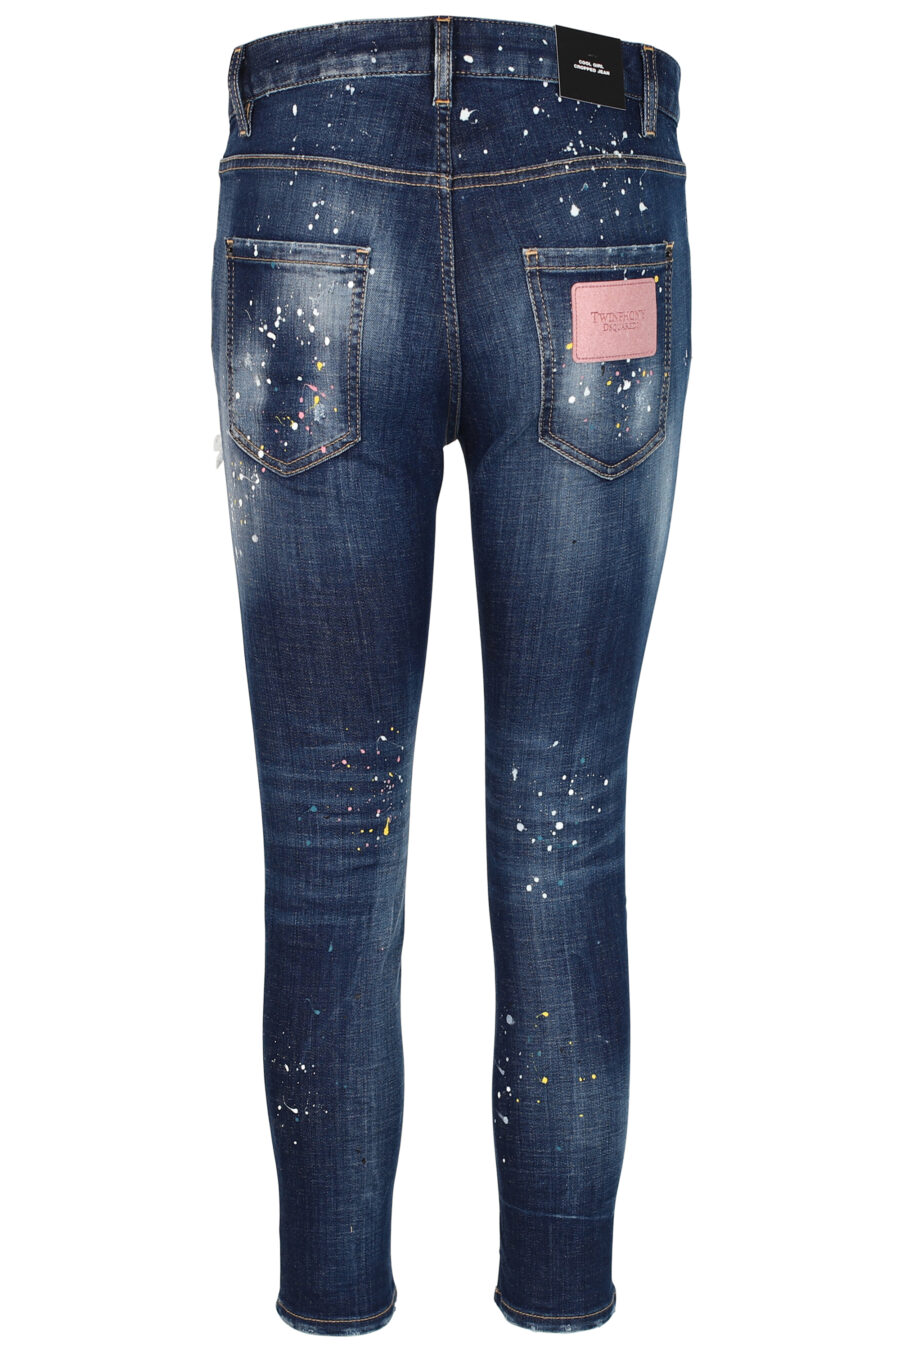 Cool girl cropped jeans "Cool girl cropped jean" blue worn with rips - 8052134942512 3